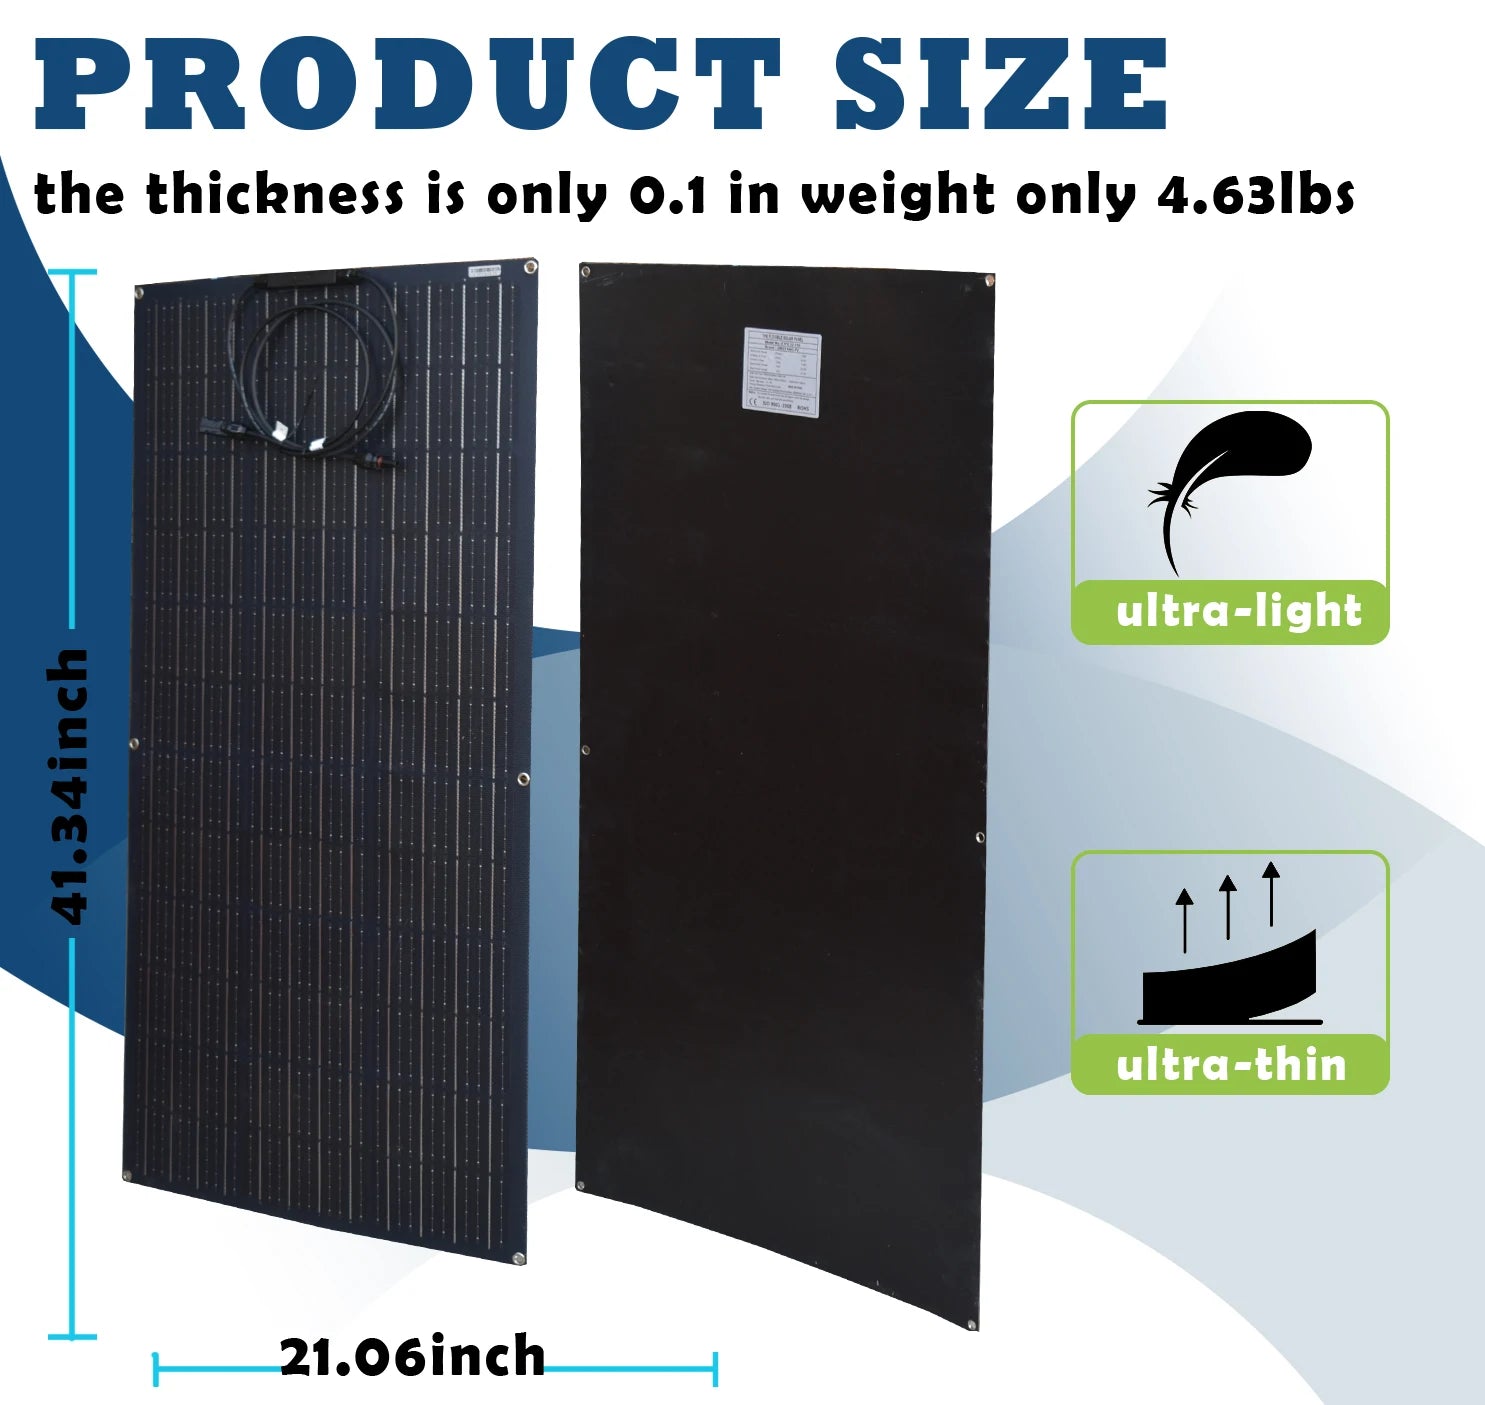 Thin and lightweight solar panel, measuring 21.06in long and weighing 4.63lbs.